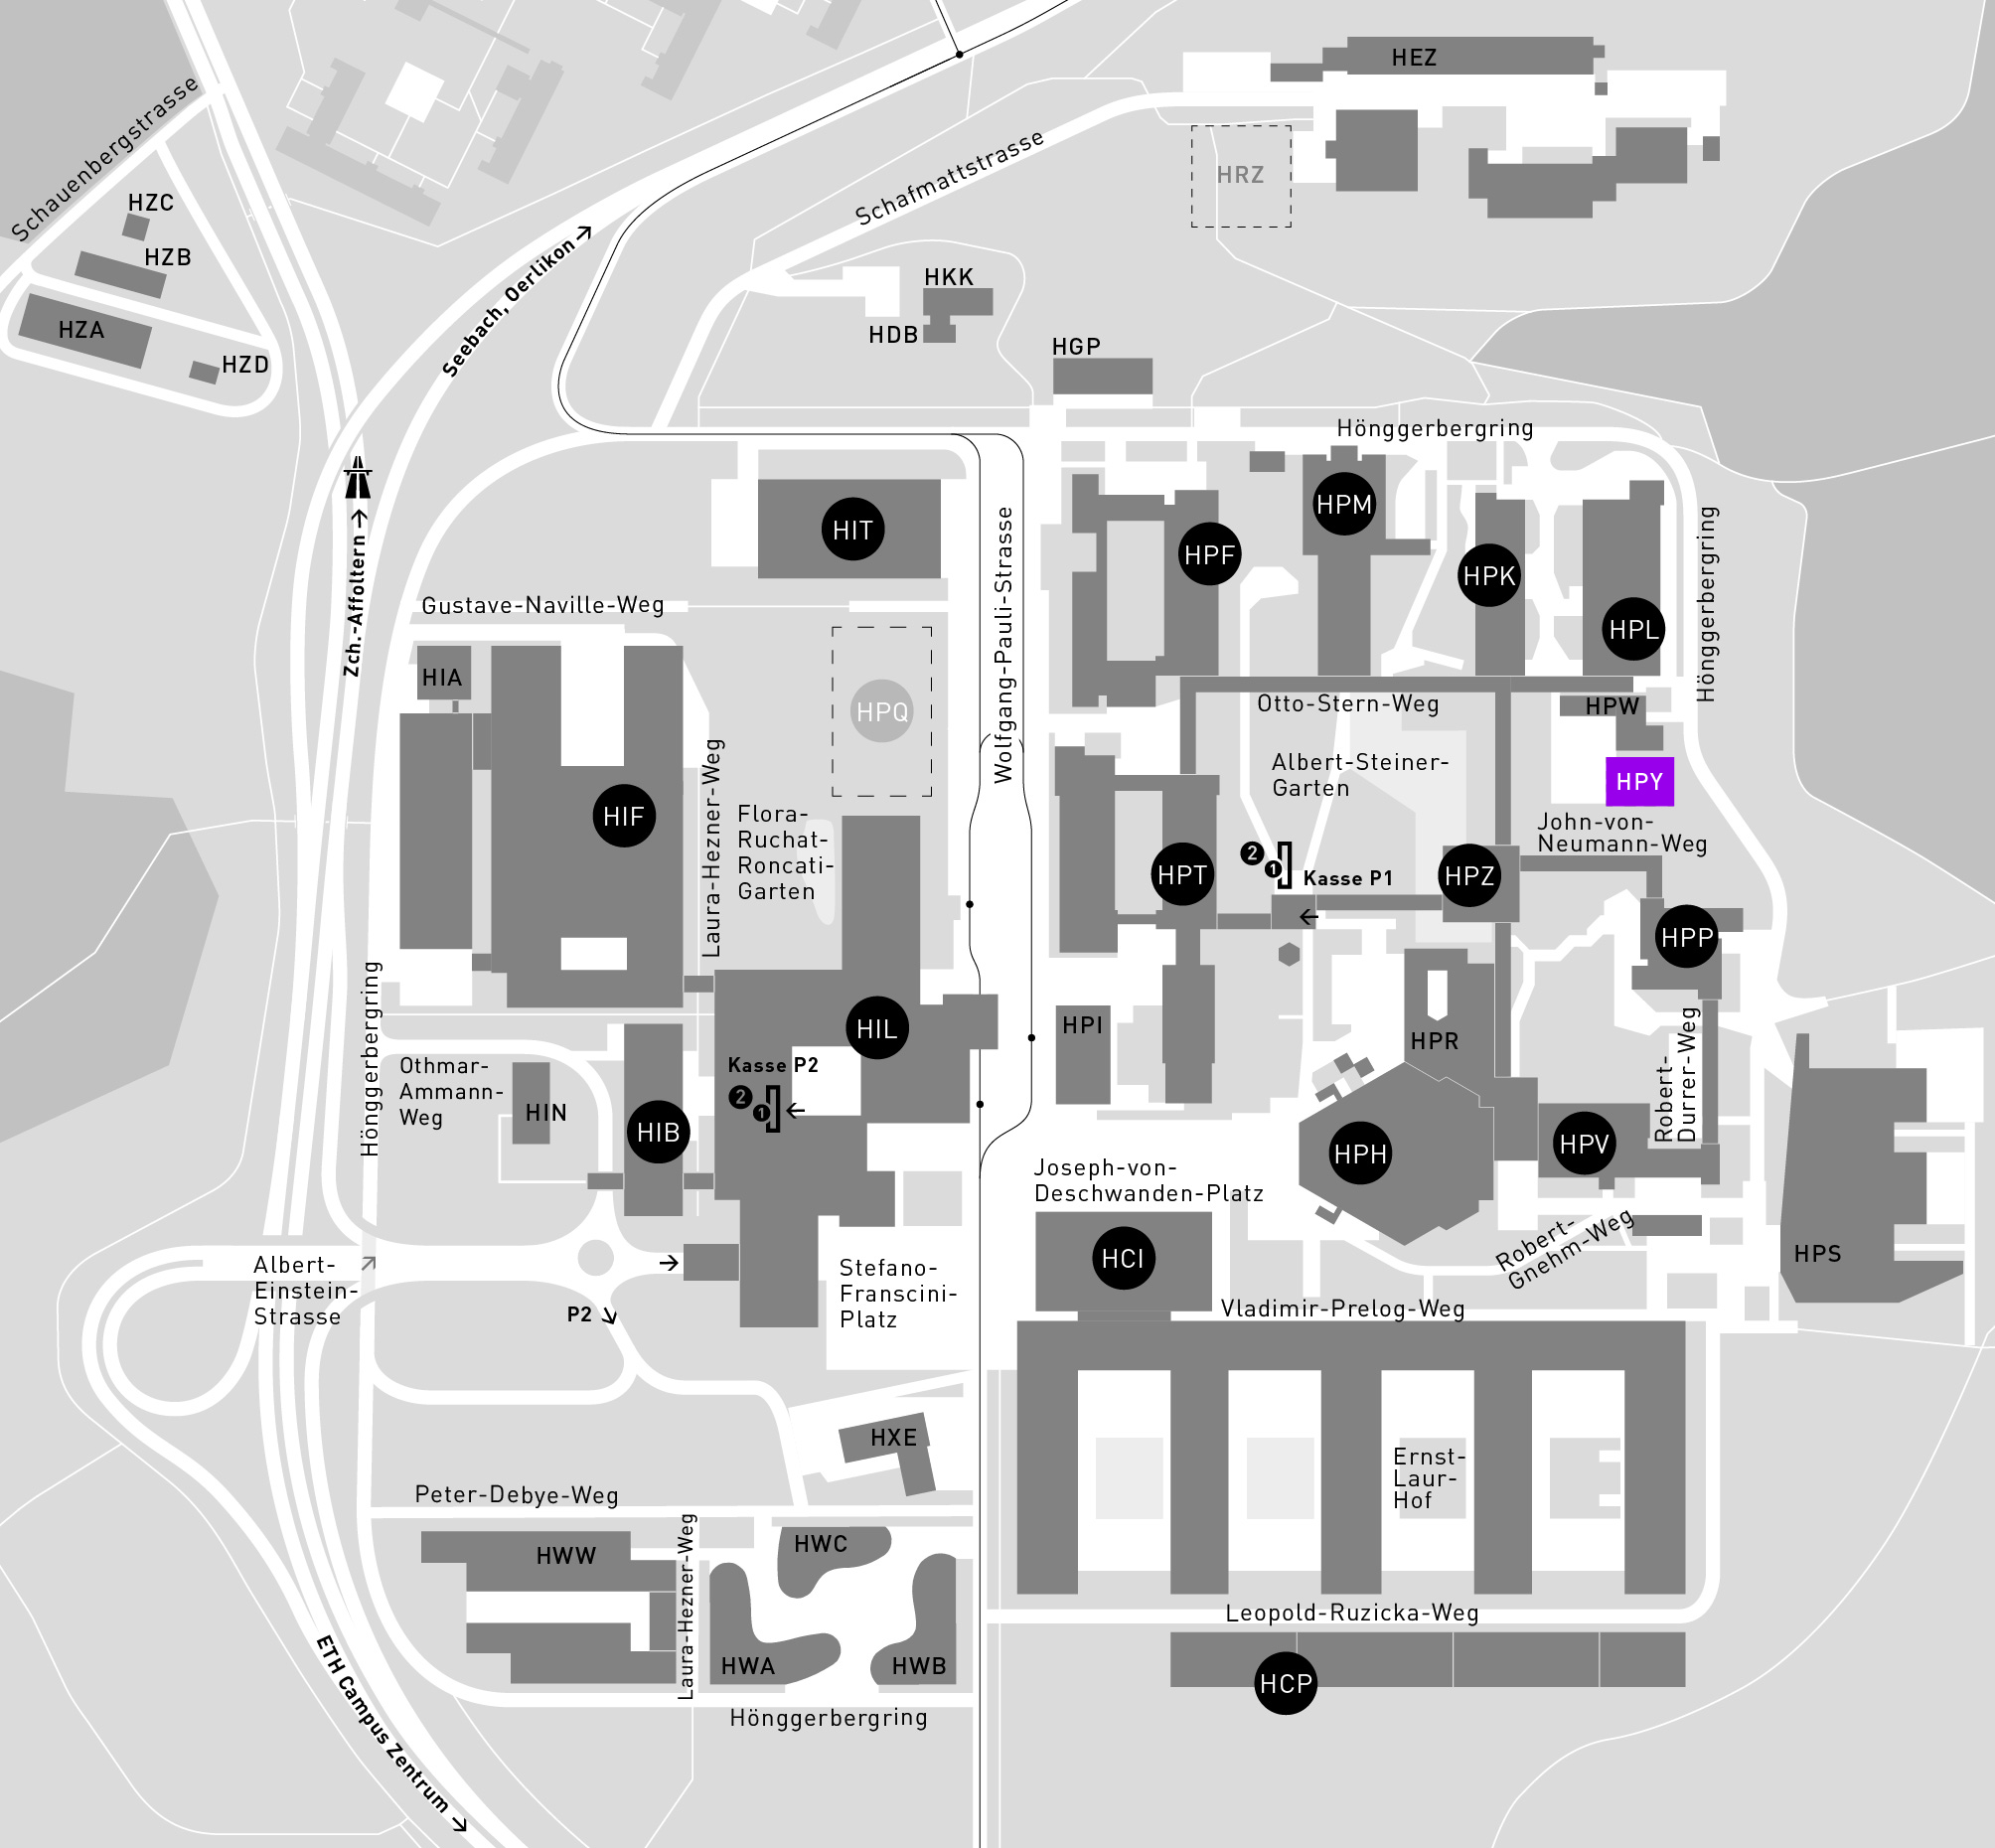 Map shows the Campus Hönggerberg with marked location of HPY